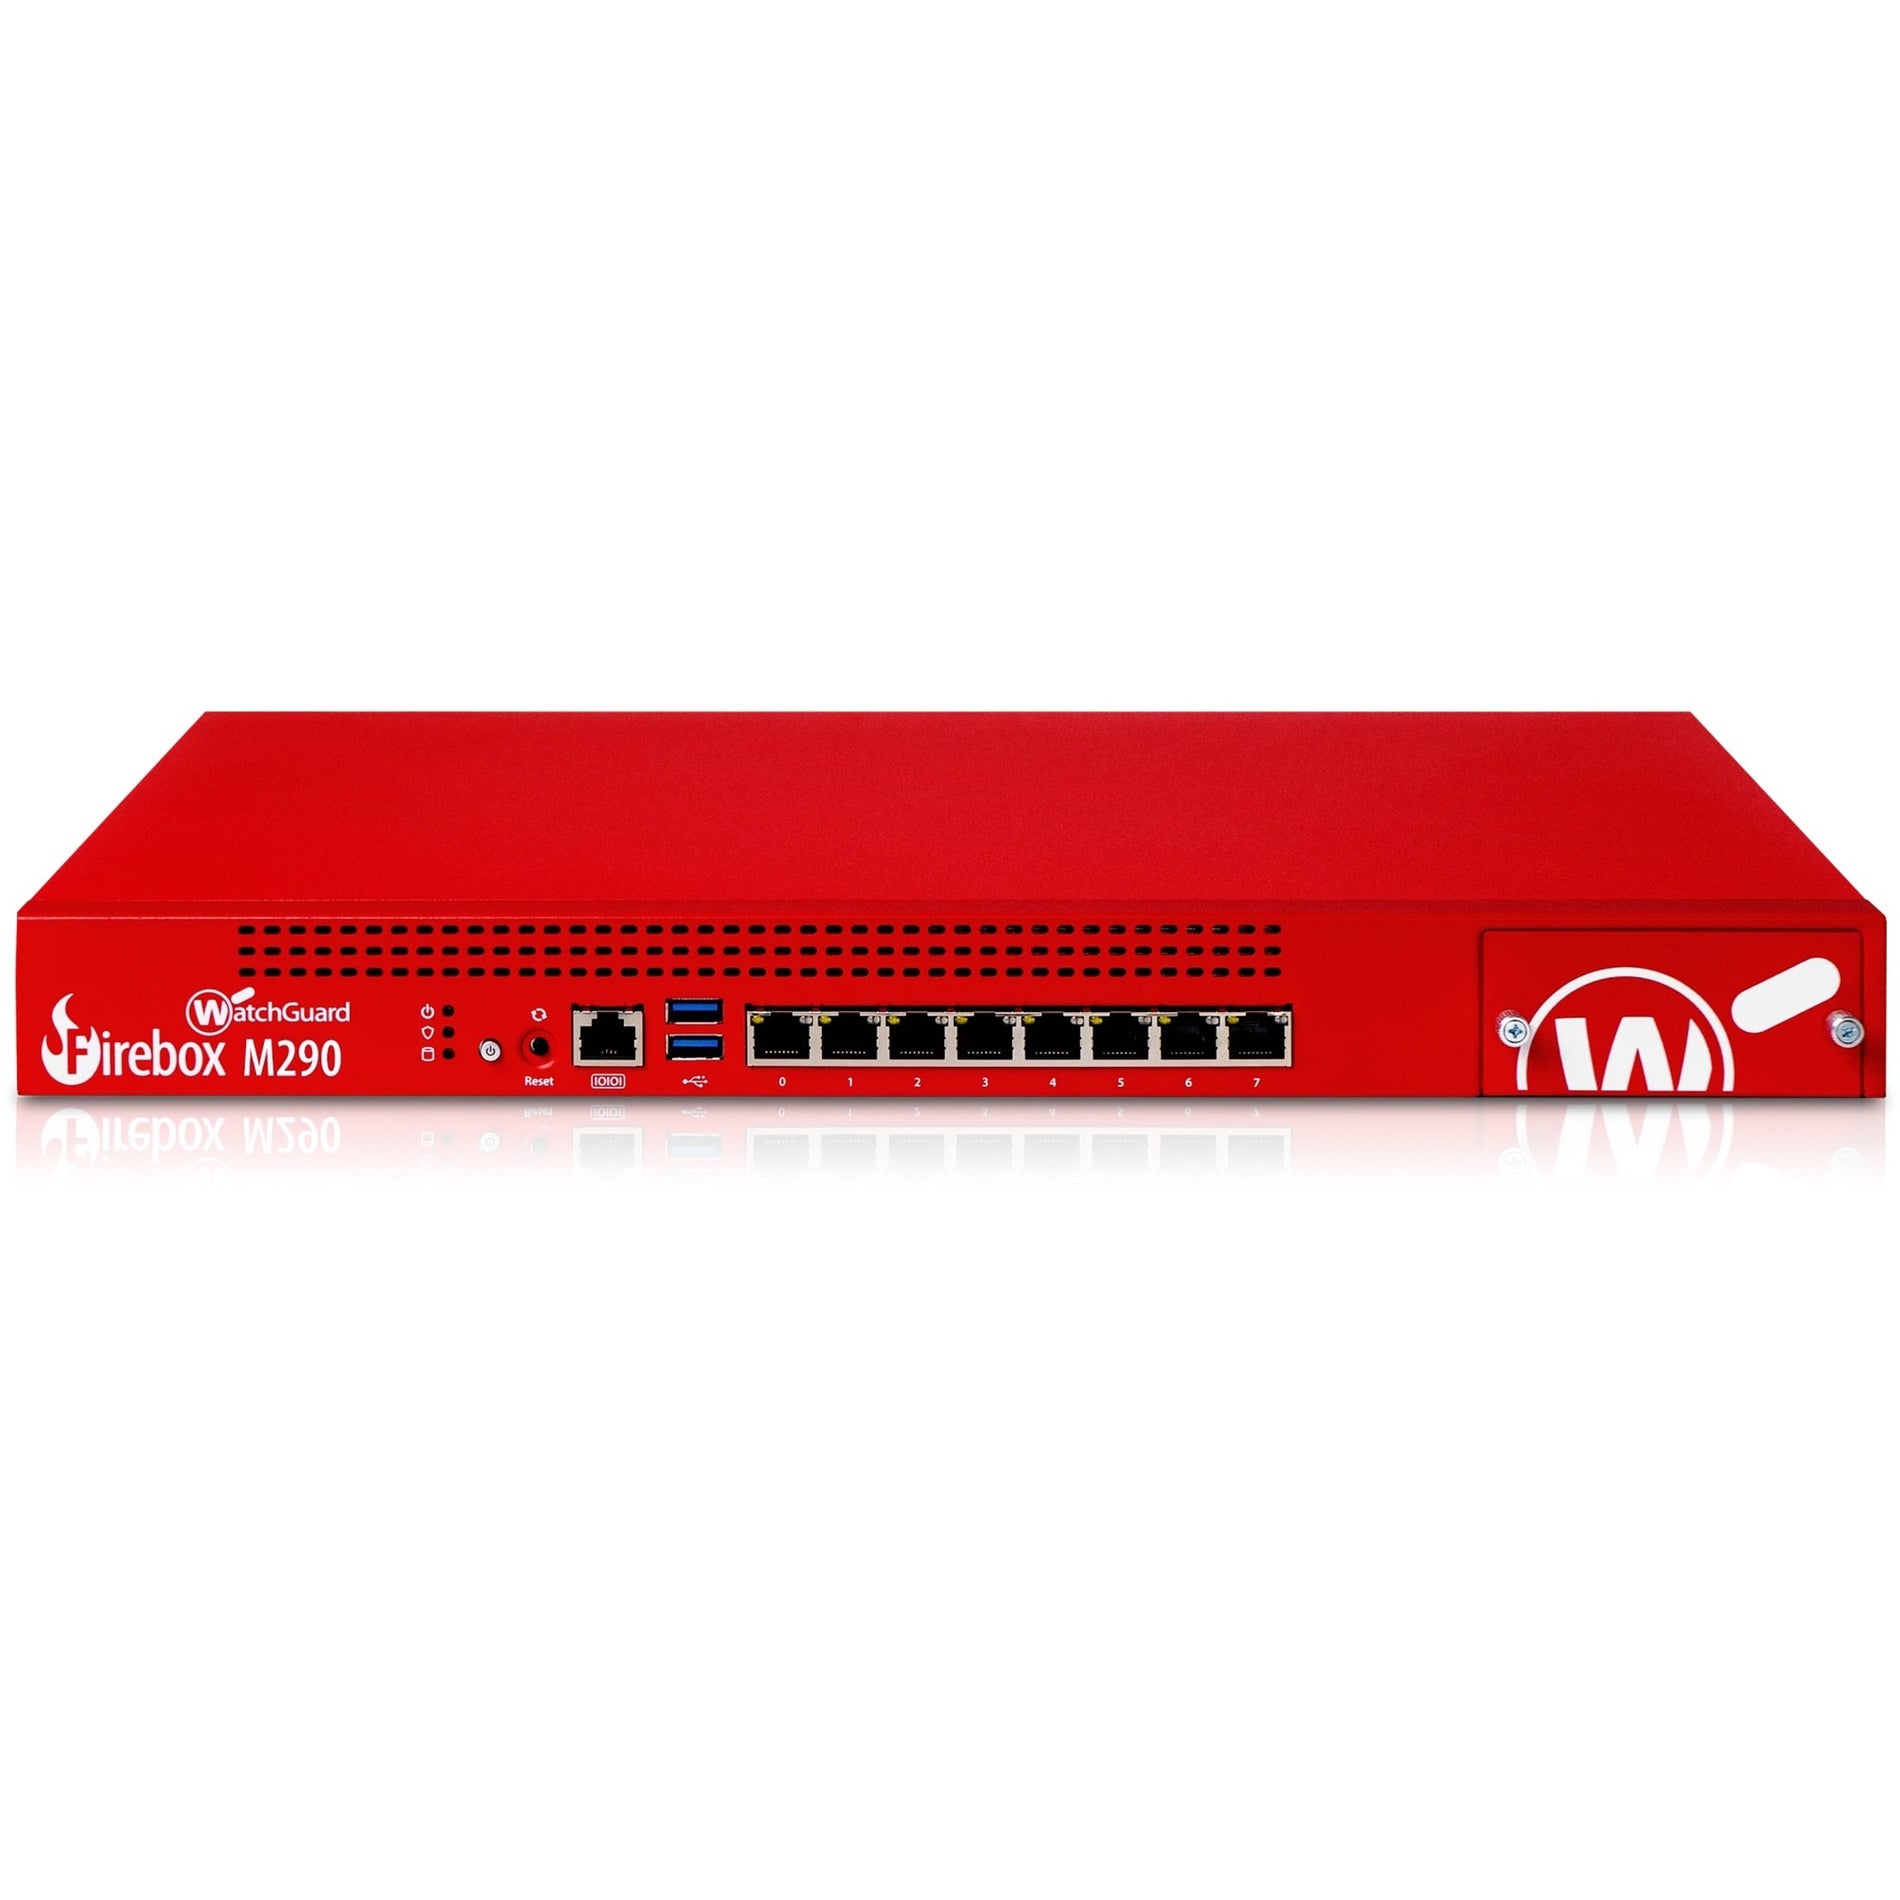 WatchGuard WGM29002003 Firebox M290 Network Security/Firewall Appliance, 8 Ports, 3-Year Basic Security Suite